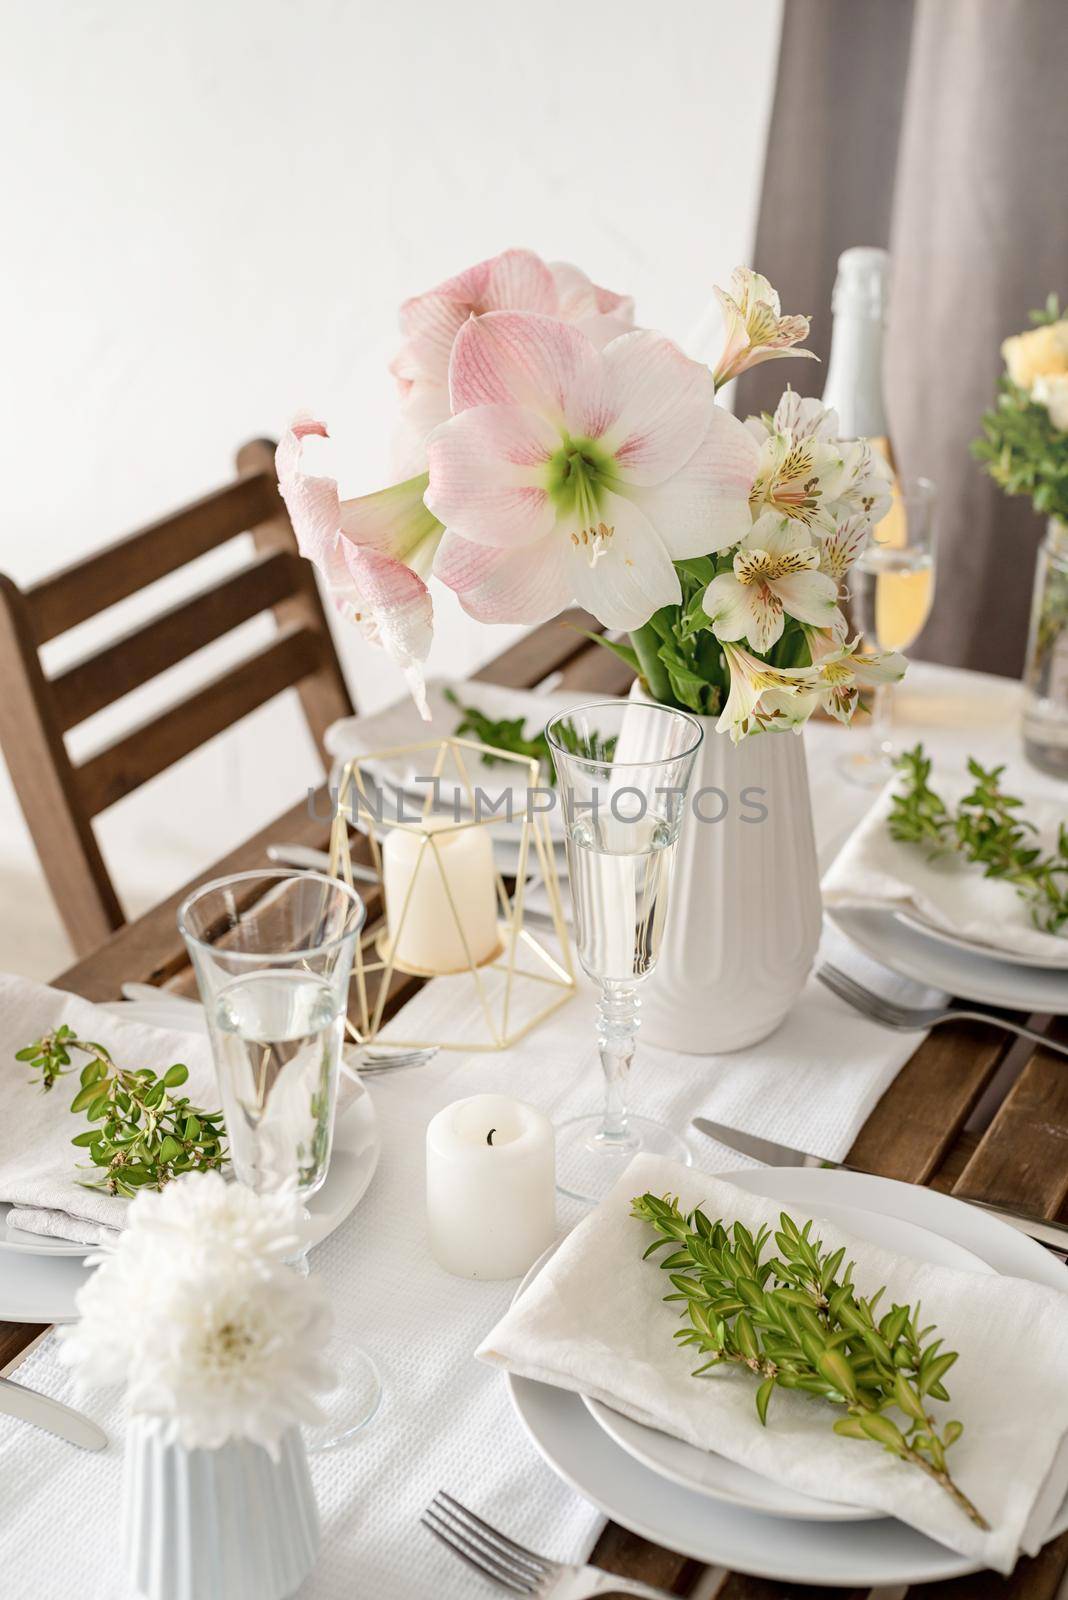 The wedding table setting and decor on wooden table in rustic style by Desperada